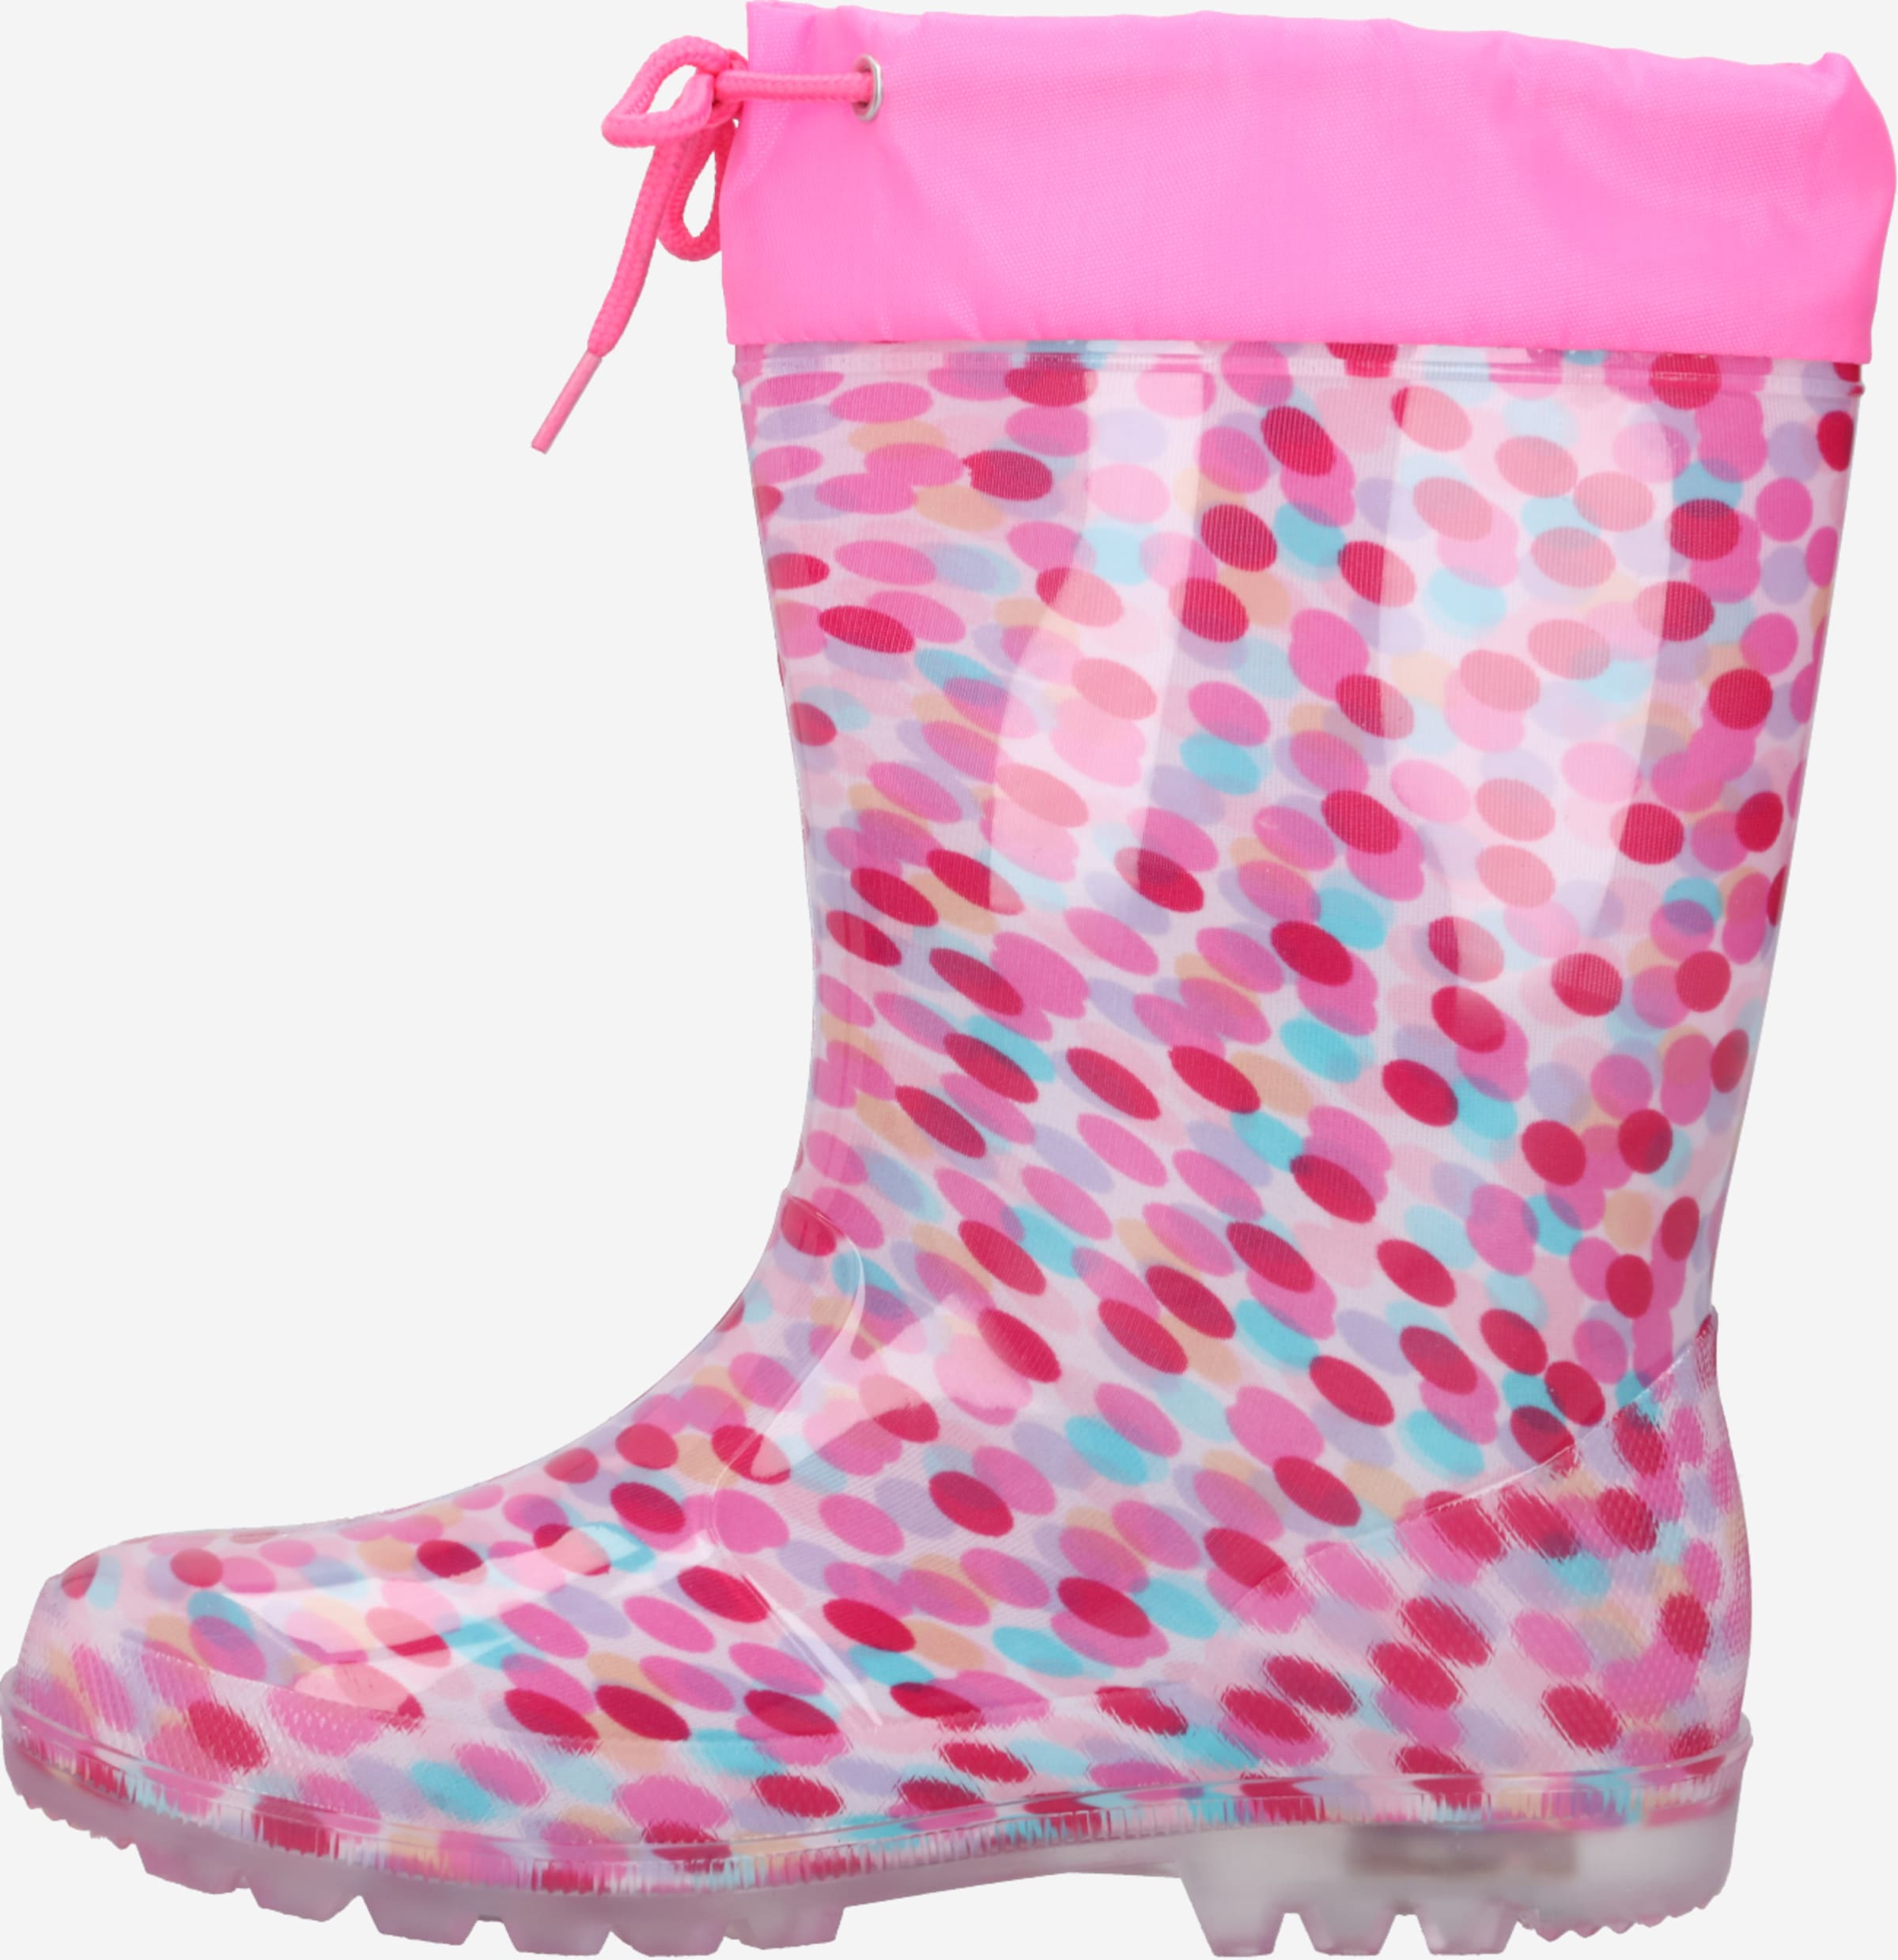 LICO Gummistiefel \'Power Blinky\' Pink, YOU in Rosa ABOUT 